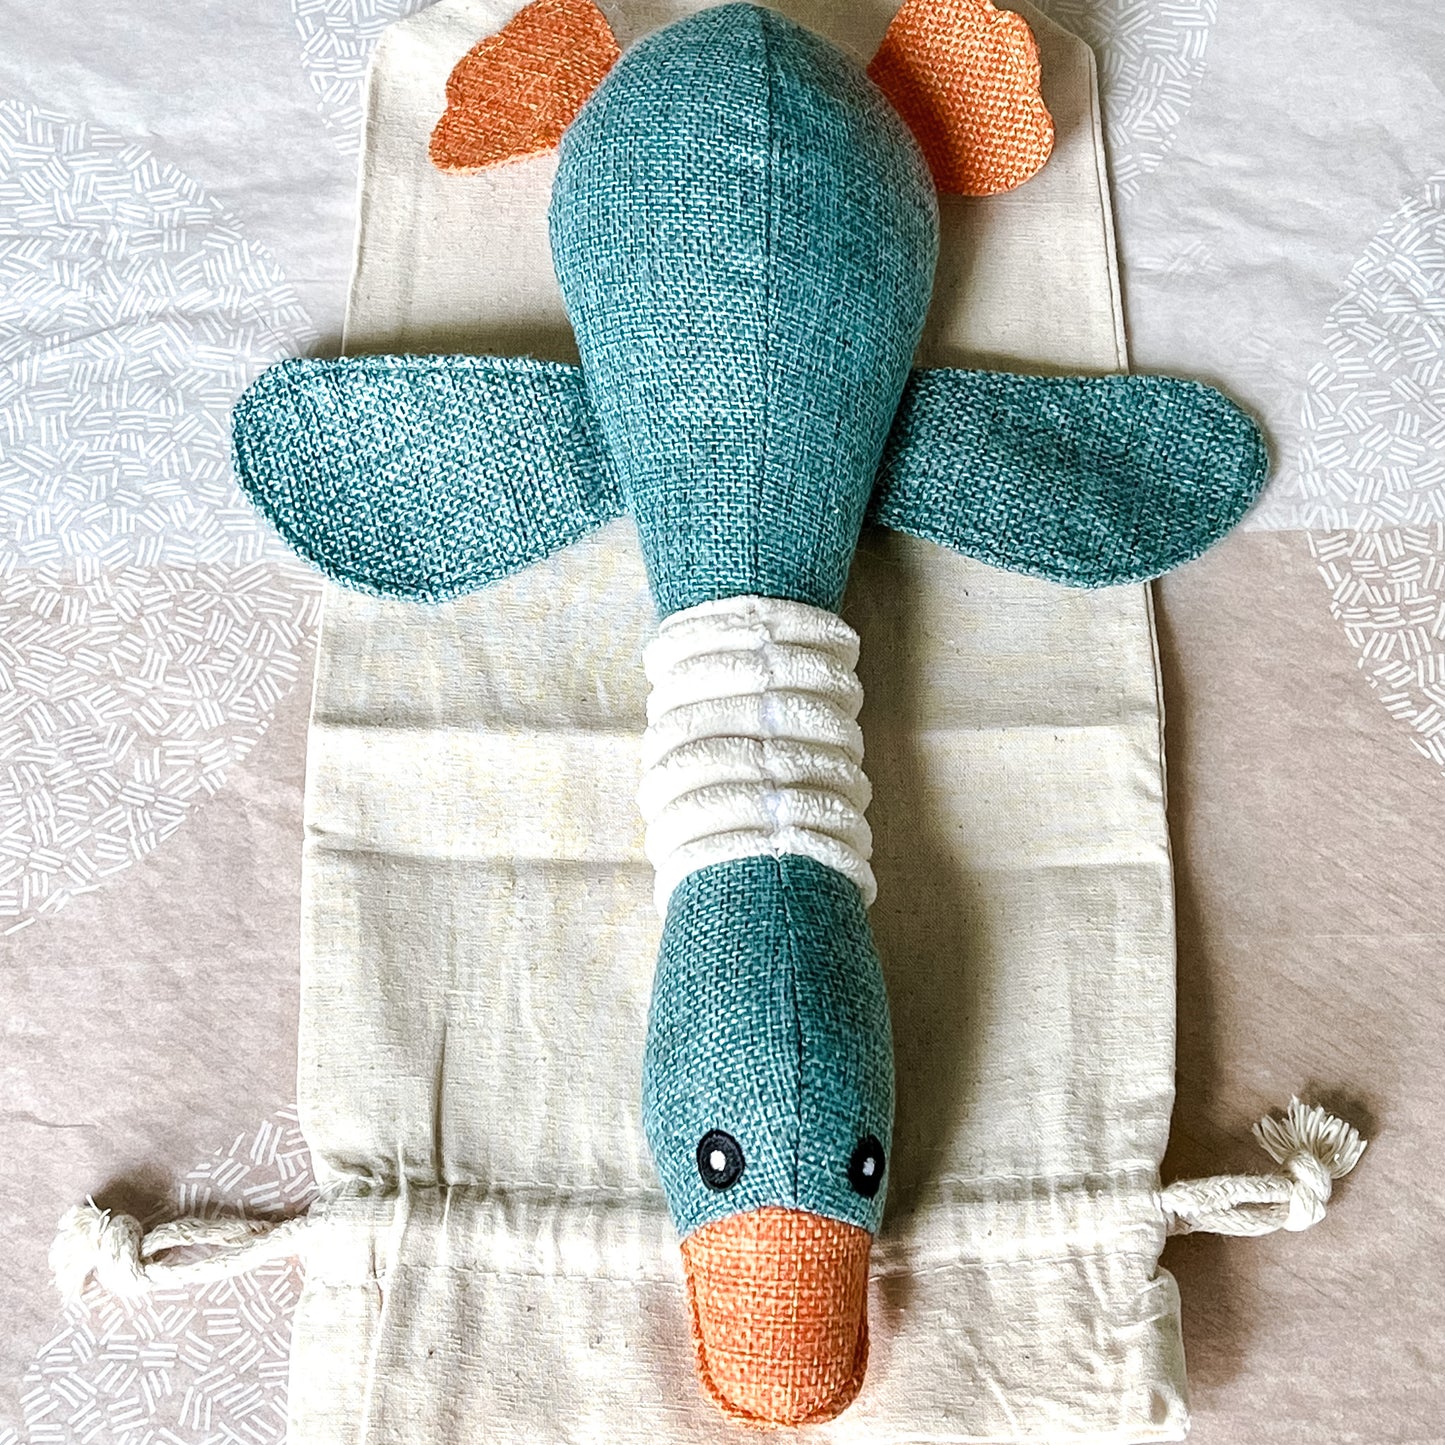 squeaky duck dog toy and cotton gift bag by Border Loves